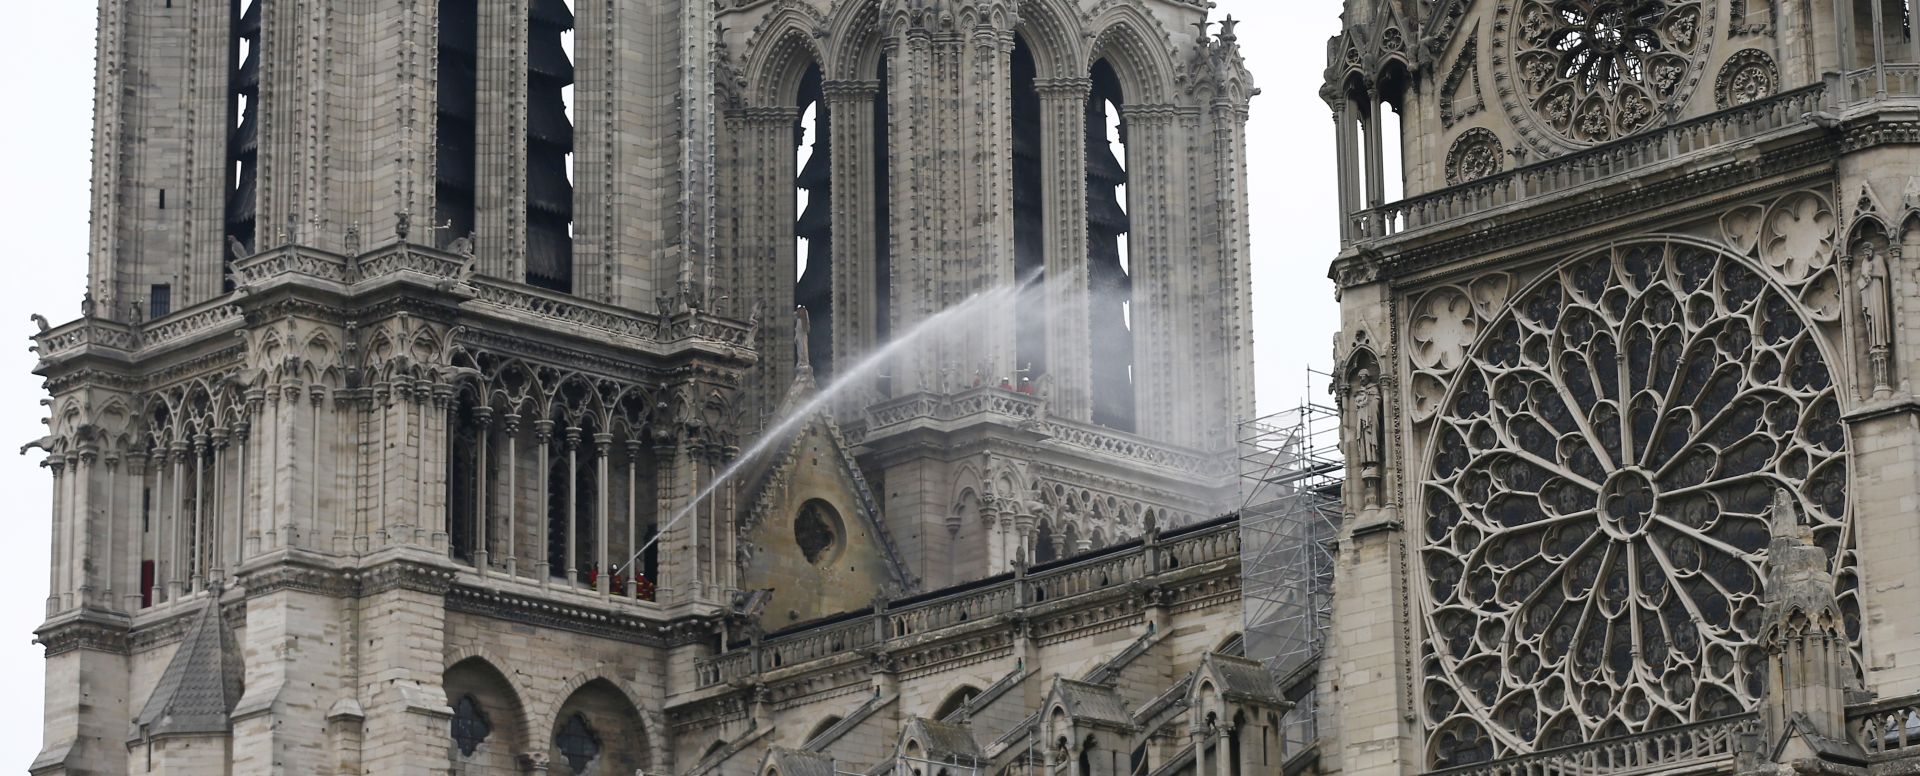 epa07510403 Fire fighters continue to spray water after a massive fire destroyed the roof of the Notre-Dame Cathedral in Paris, France, 16 April 2019. A fire started in the late afternoon 15 April in one of the most visited monuments of the French capital.  EPA/IAN LANGSDON